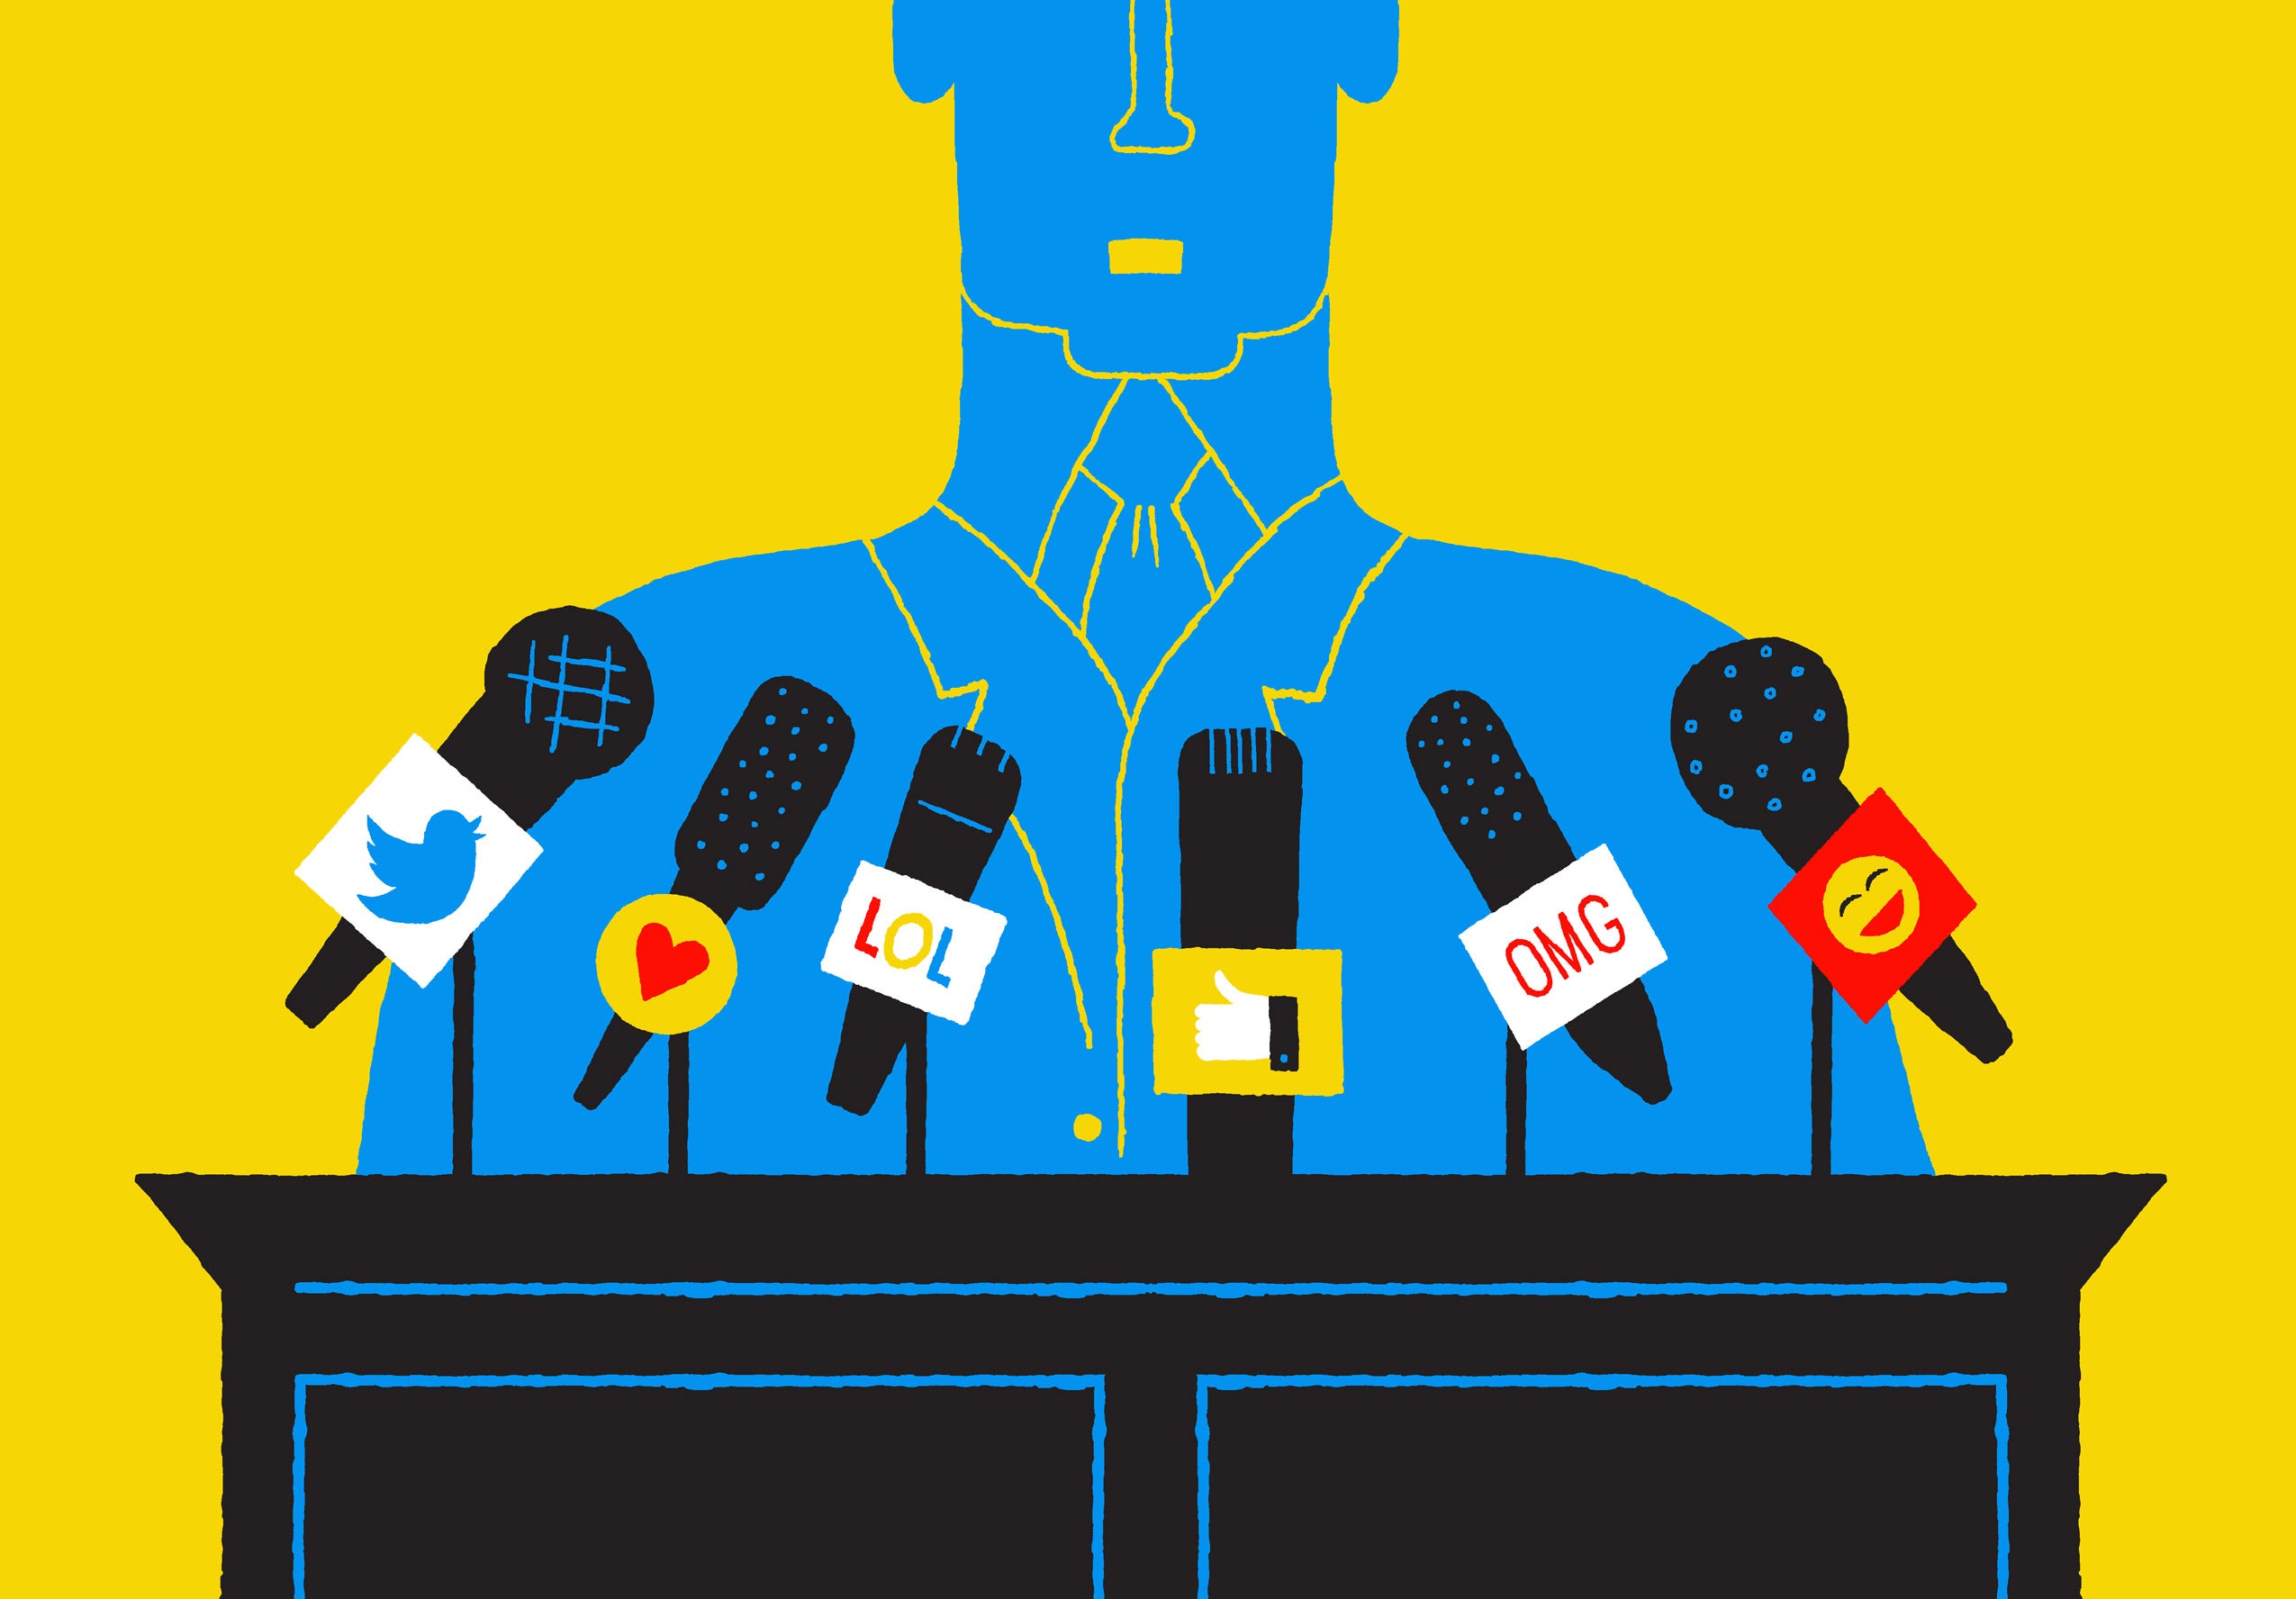 Illustration a man at a podium in front of six microphones with a social media logo or a social media response attached to each mic.